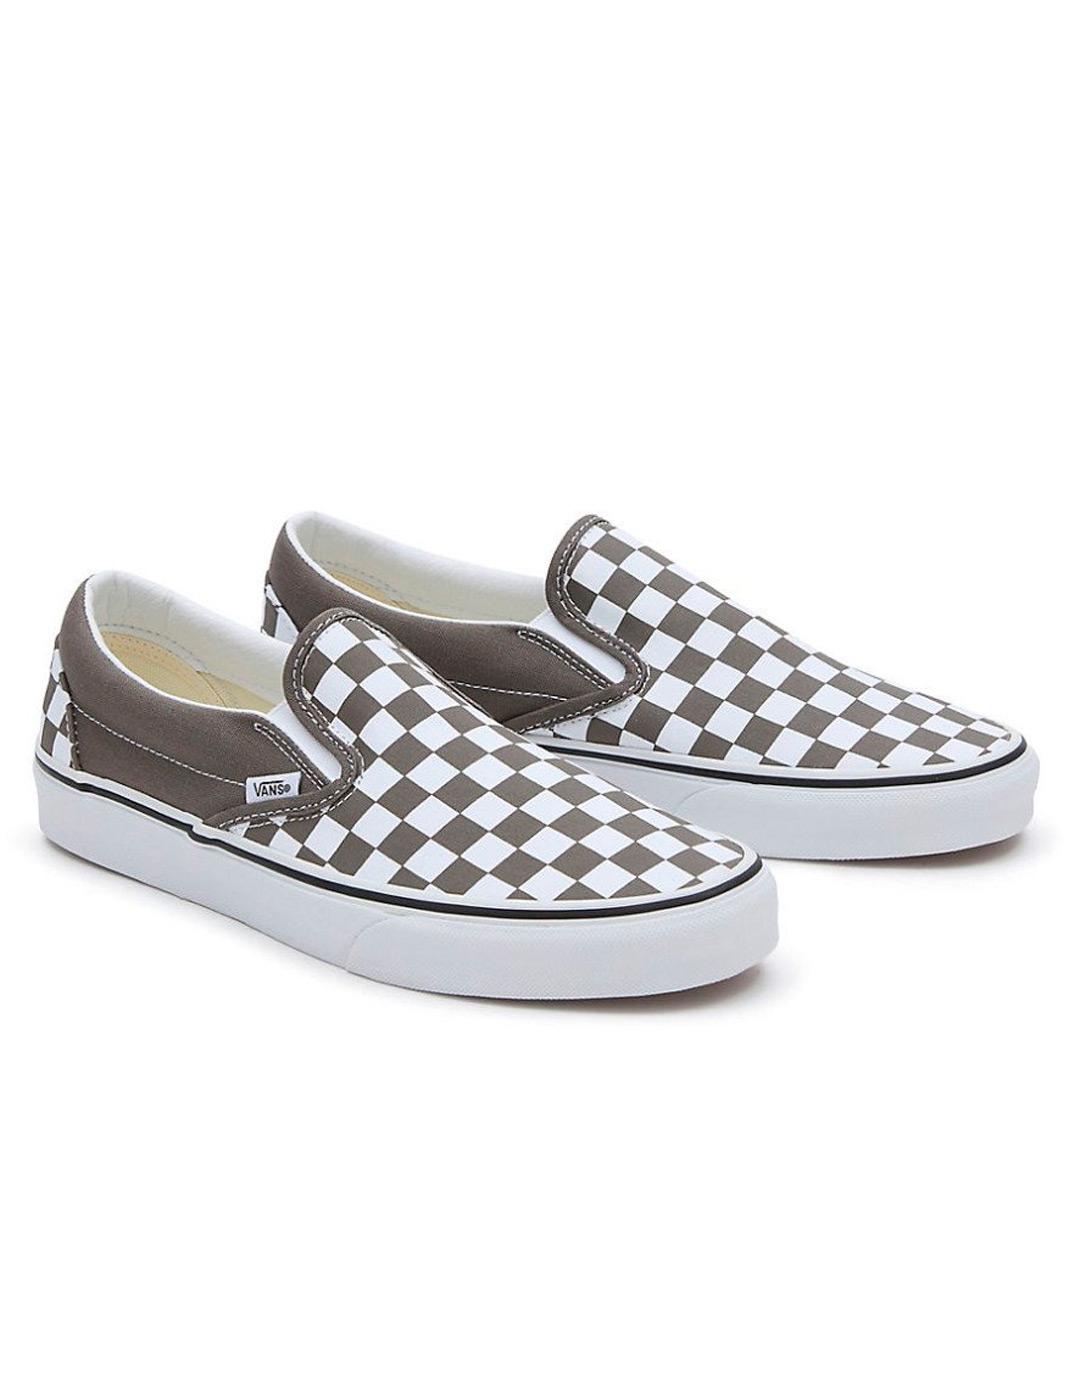 Zapatillas Vans Classic Slip-On Color Theory Check